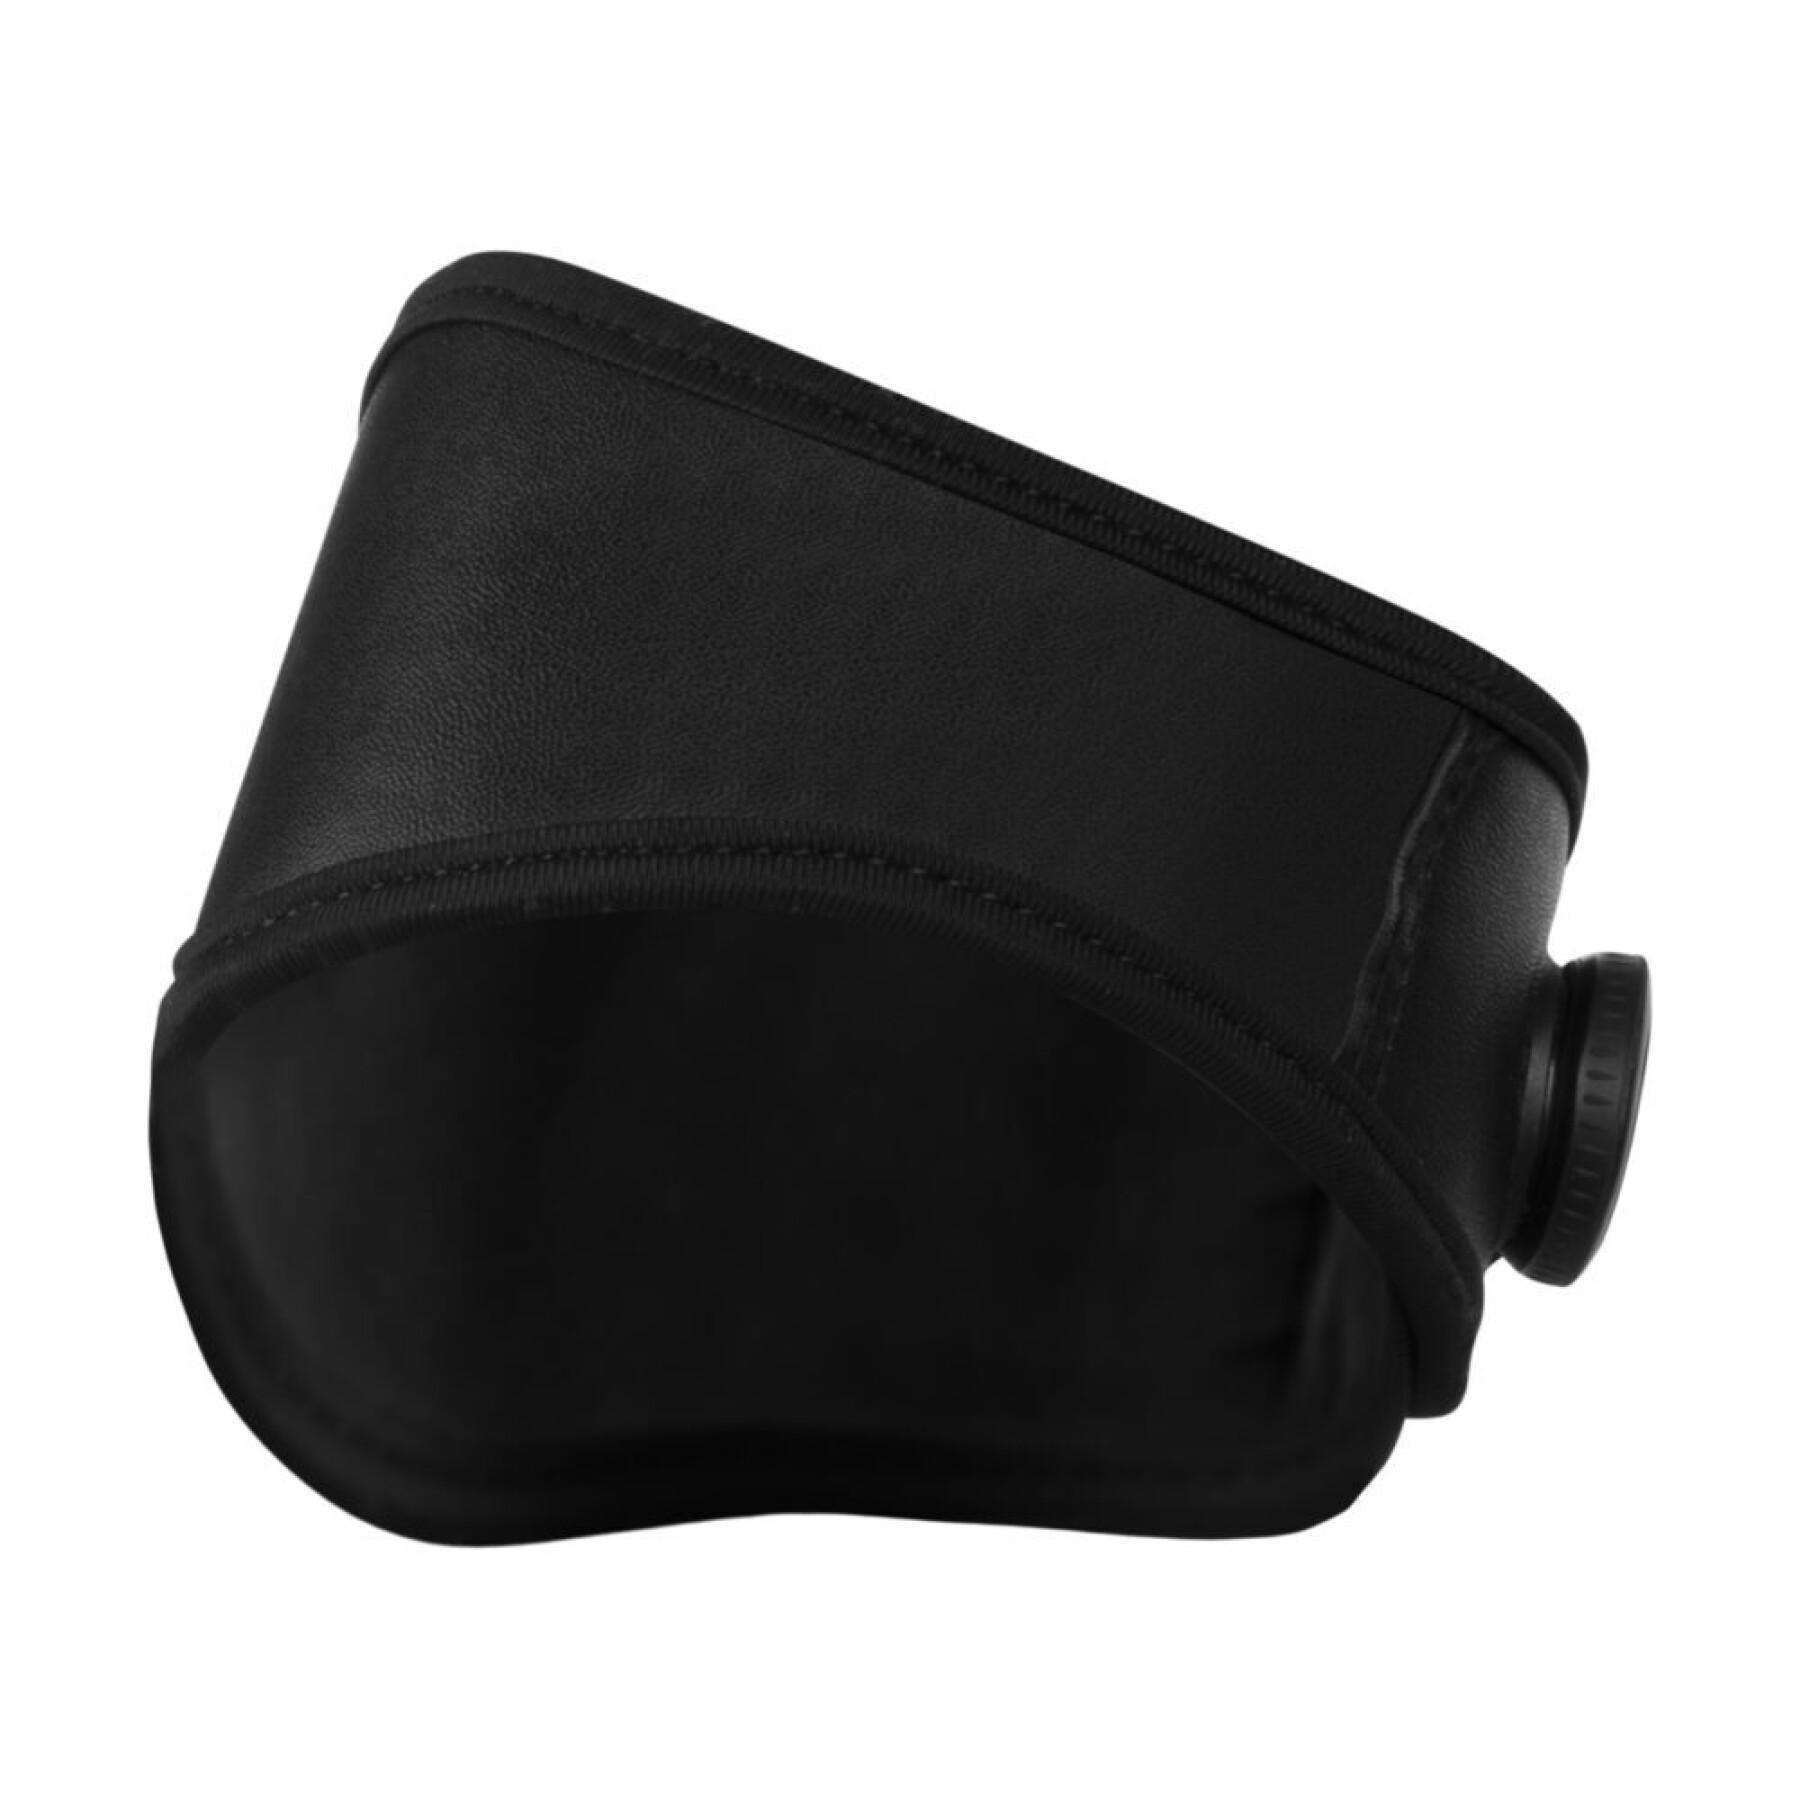 Adjustable elbow support band Pure2Improve Deluxe